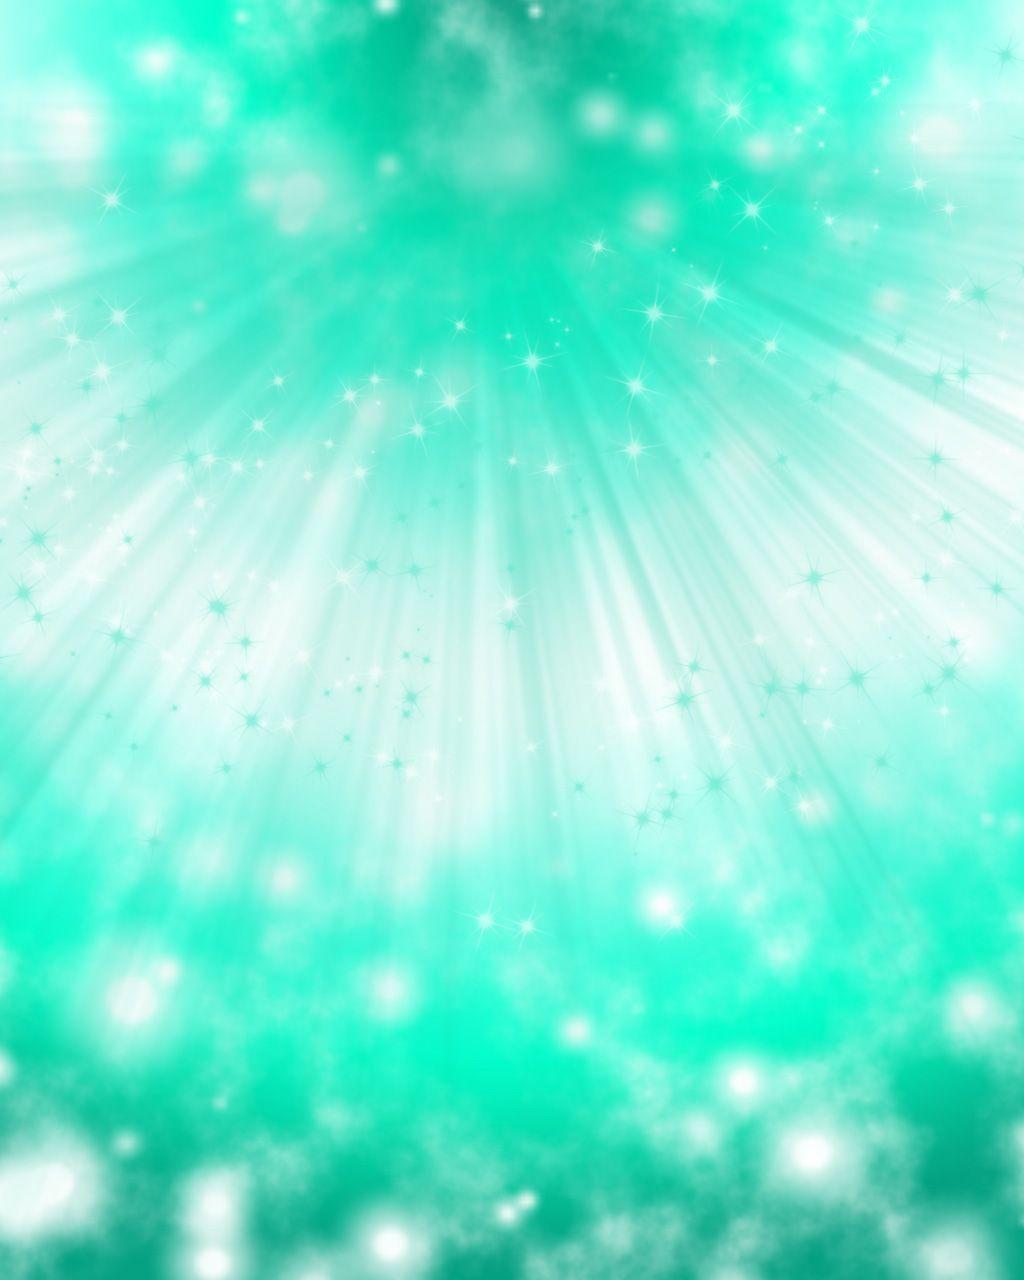 Sea Green Sparkles Background. Mint green wallpaper iphone, Sparkles background, Mint green wallpaper